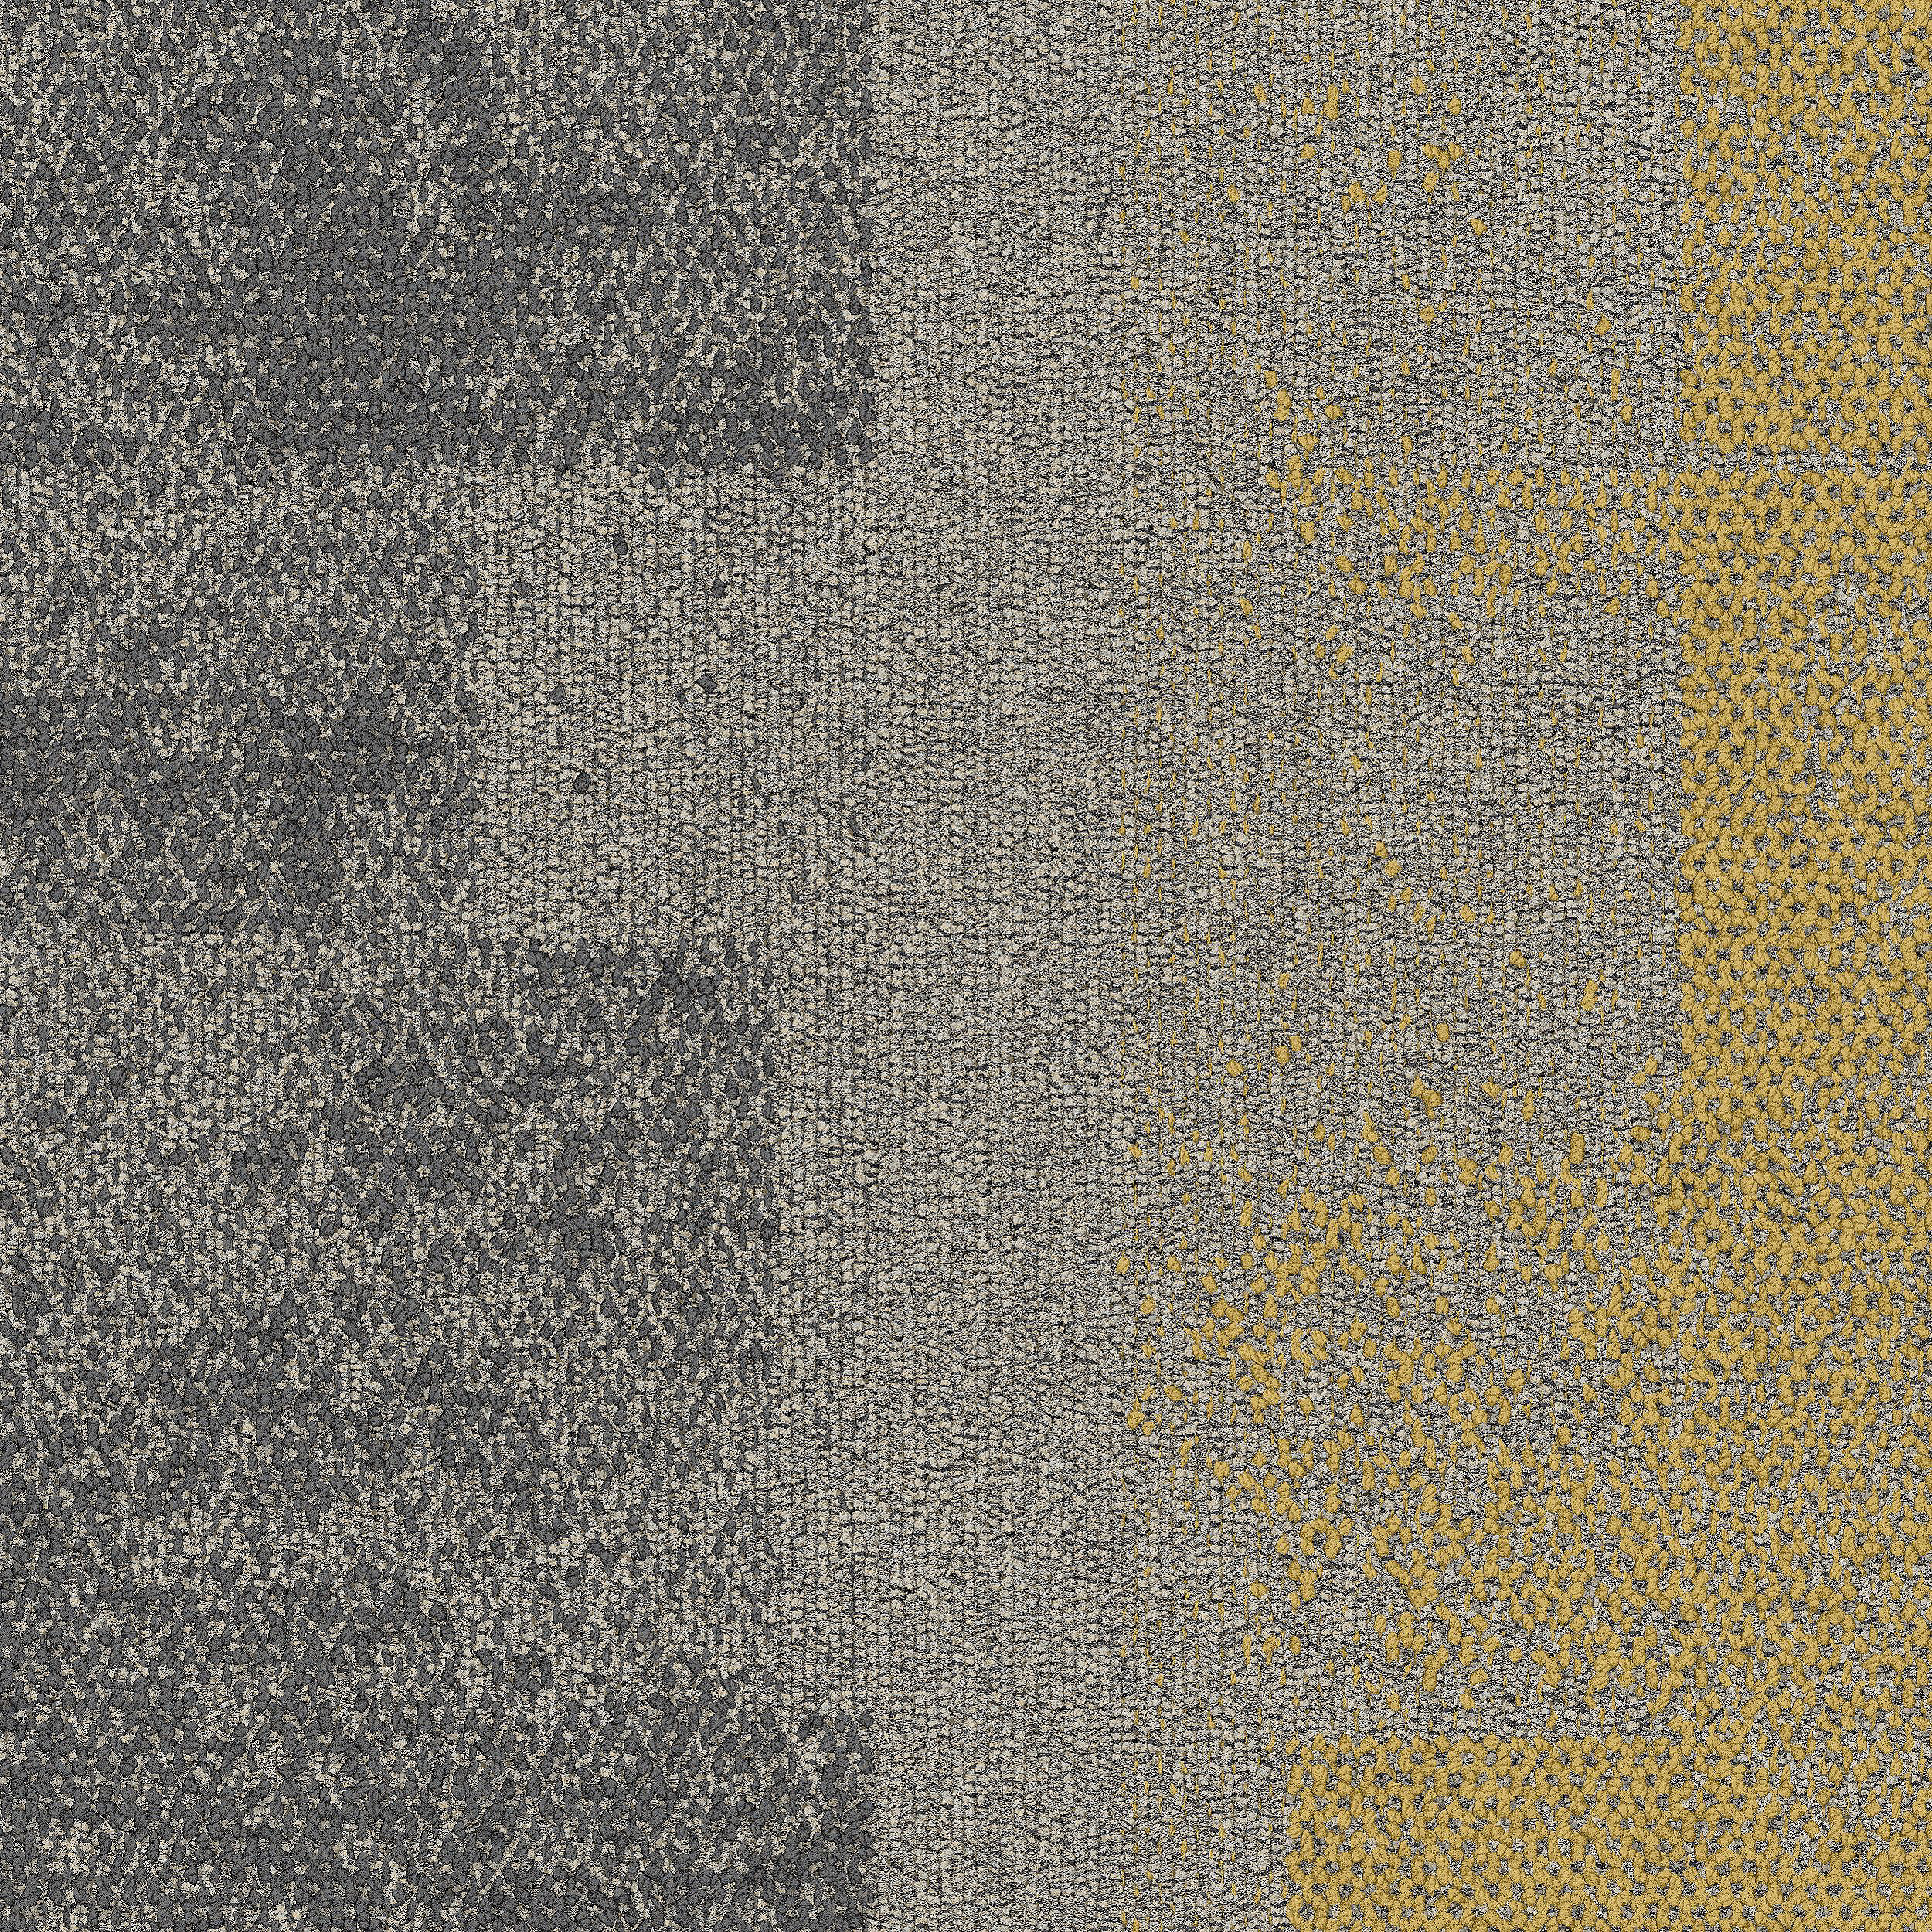 Open Air 404 Transition Carpet Tile In Nickel/Maize image number 7